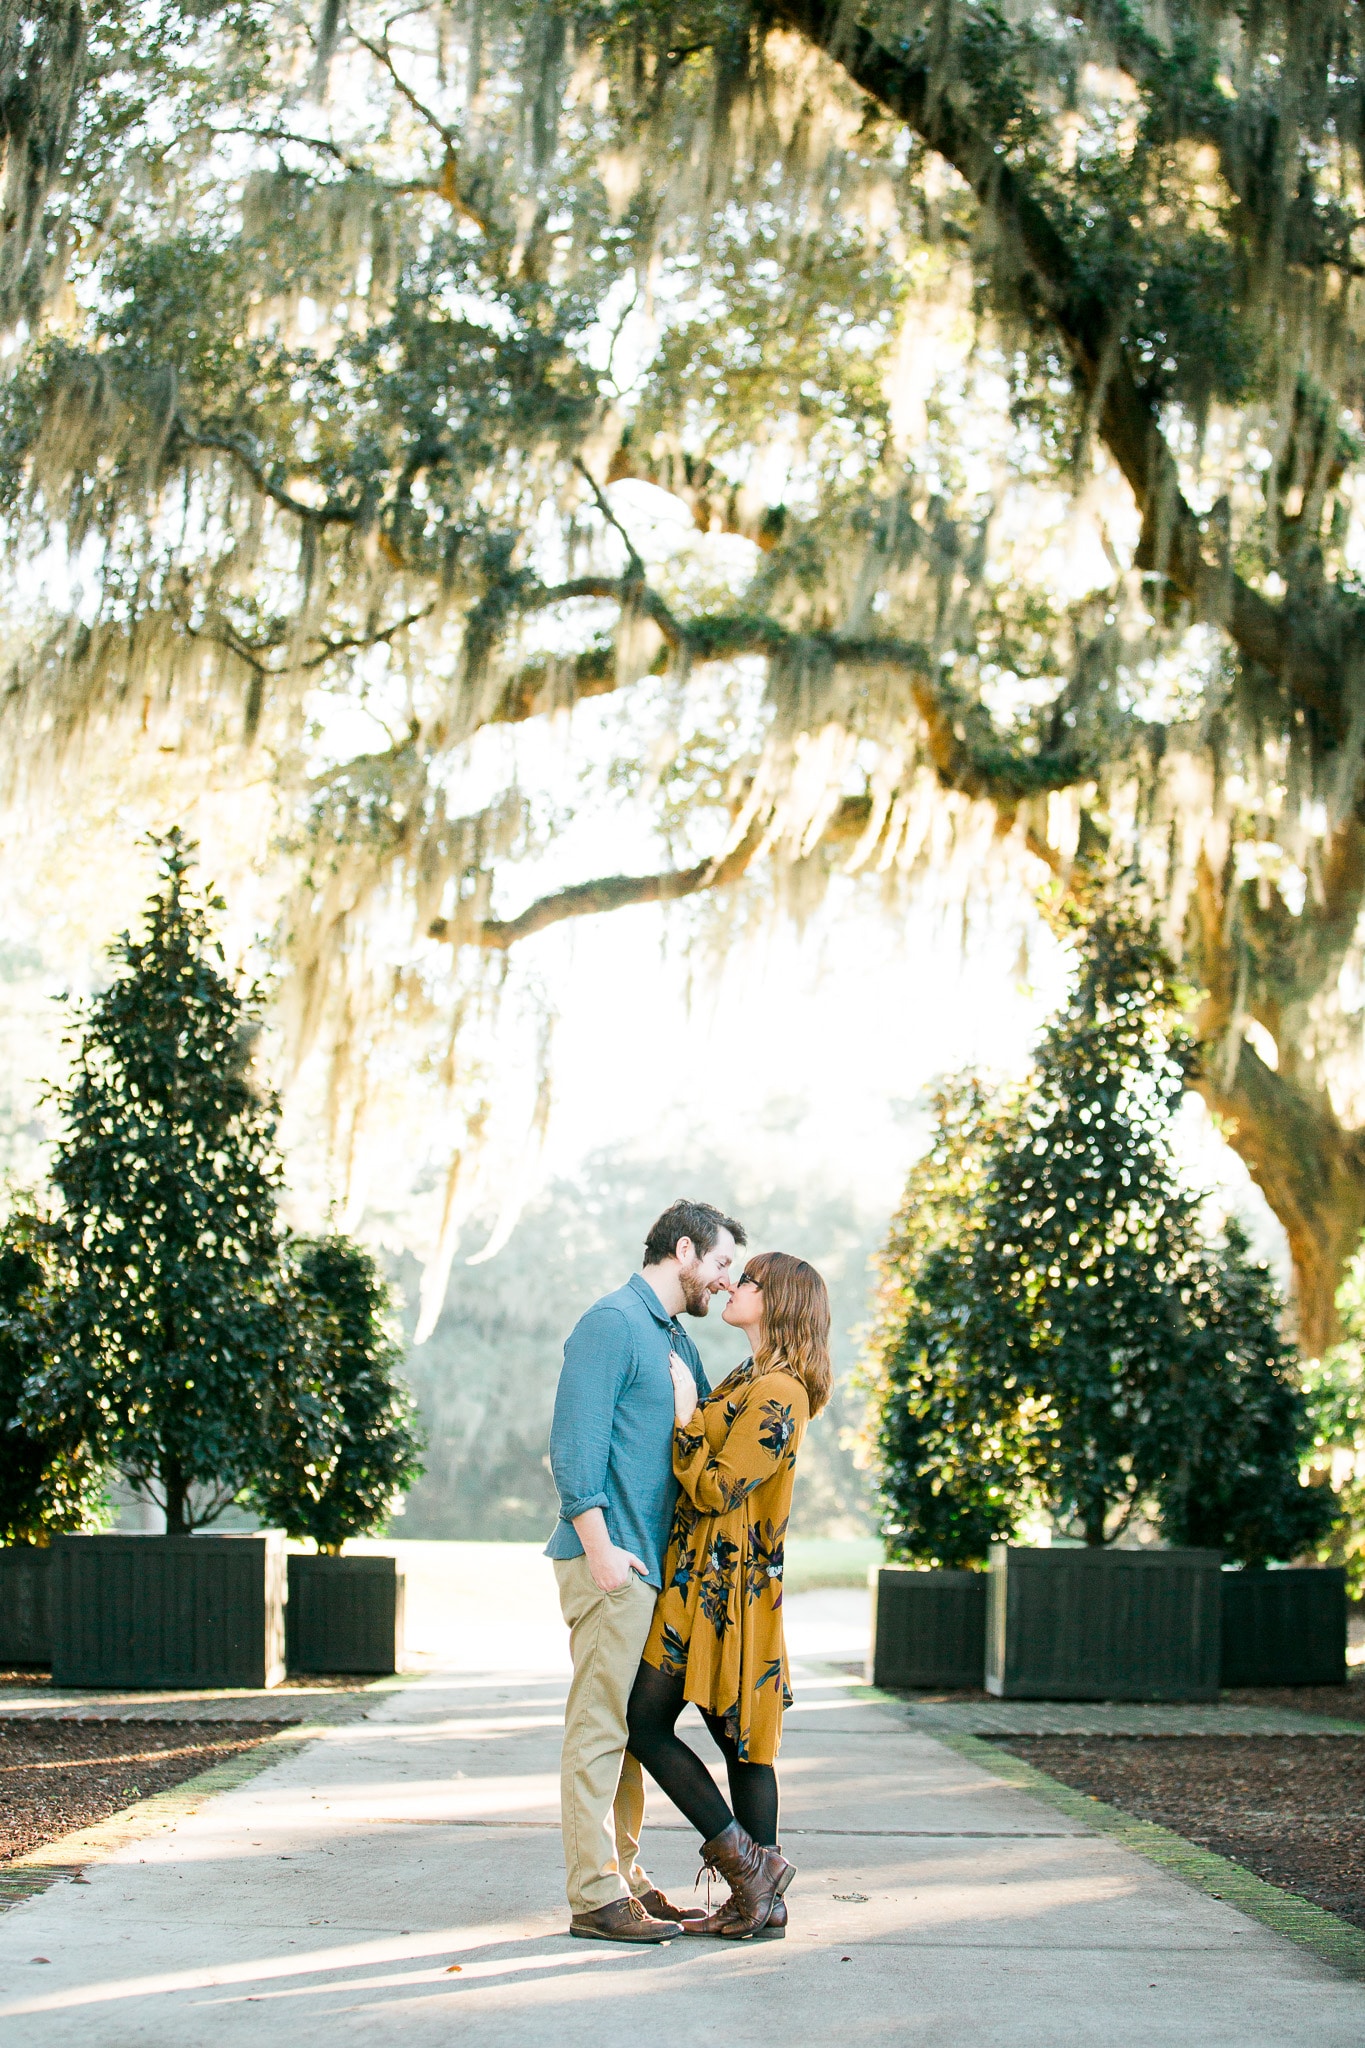 Brian and Kelsey preparing to kiss under a whispy tree, Caledonia Golf and Fish Club, Myrtle Beach Engagement Session 15, www.onelifephoto.net